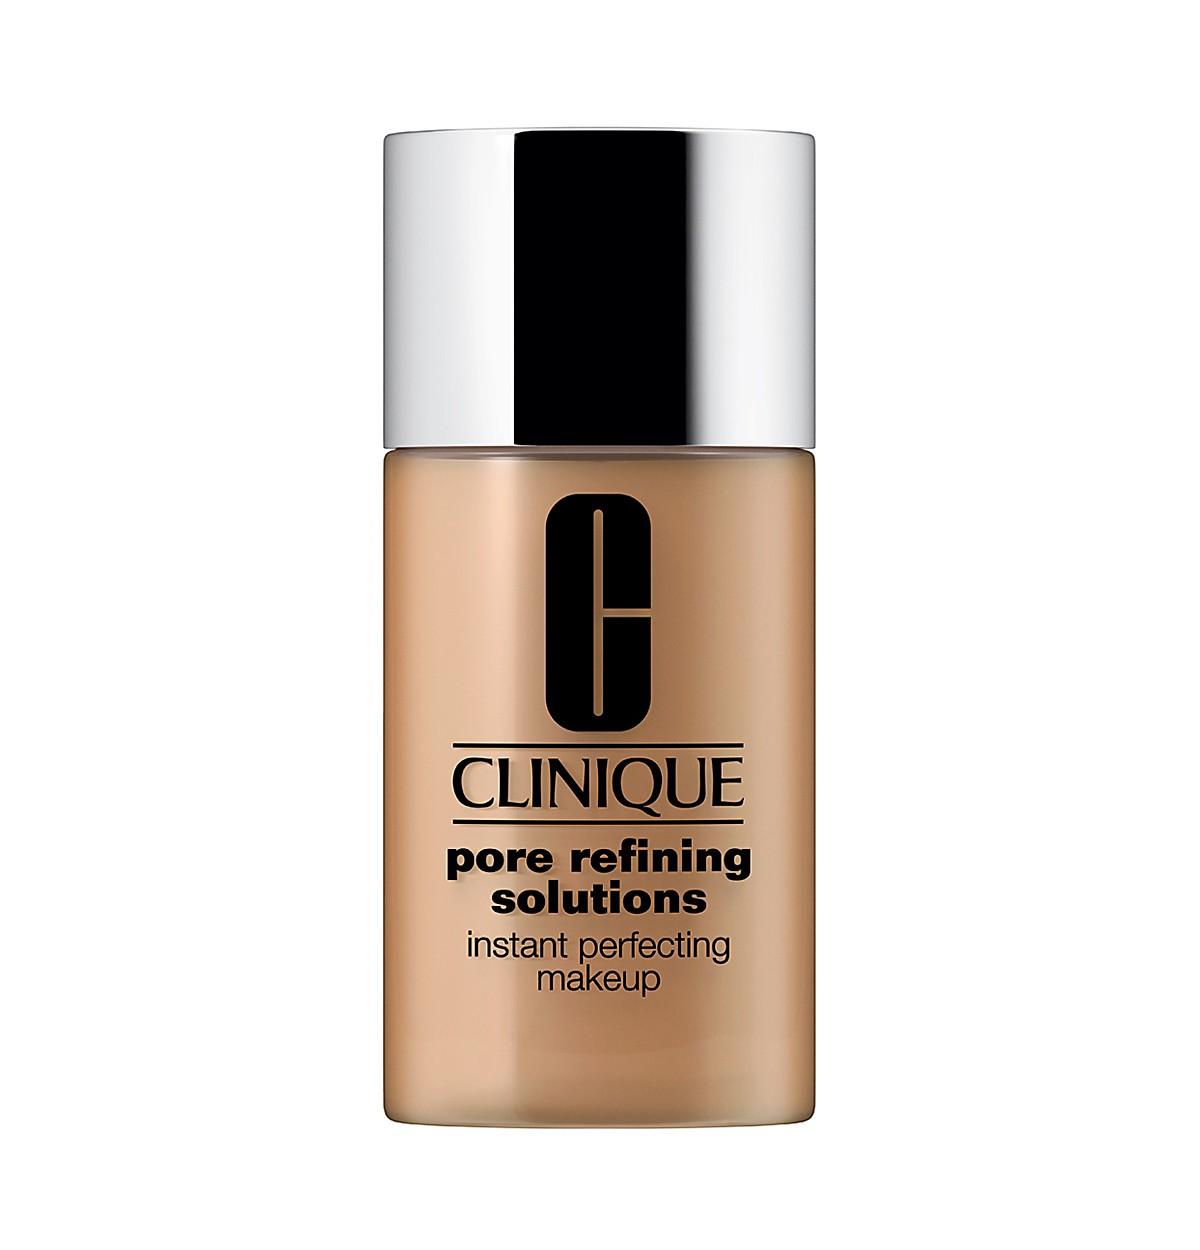 Foto Mujer Maquillaje Clinique Pore Refining Solutions Instant Perfecting foto 762757